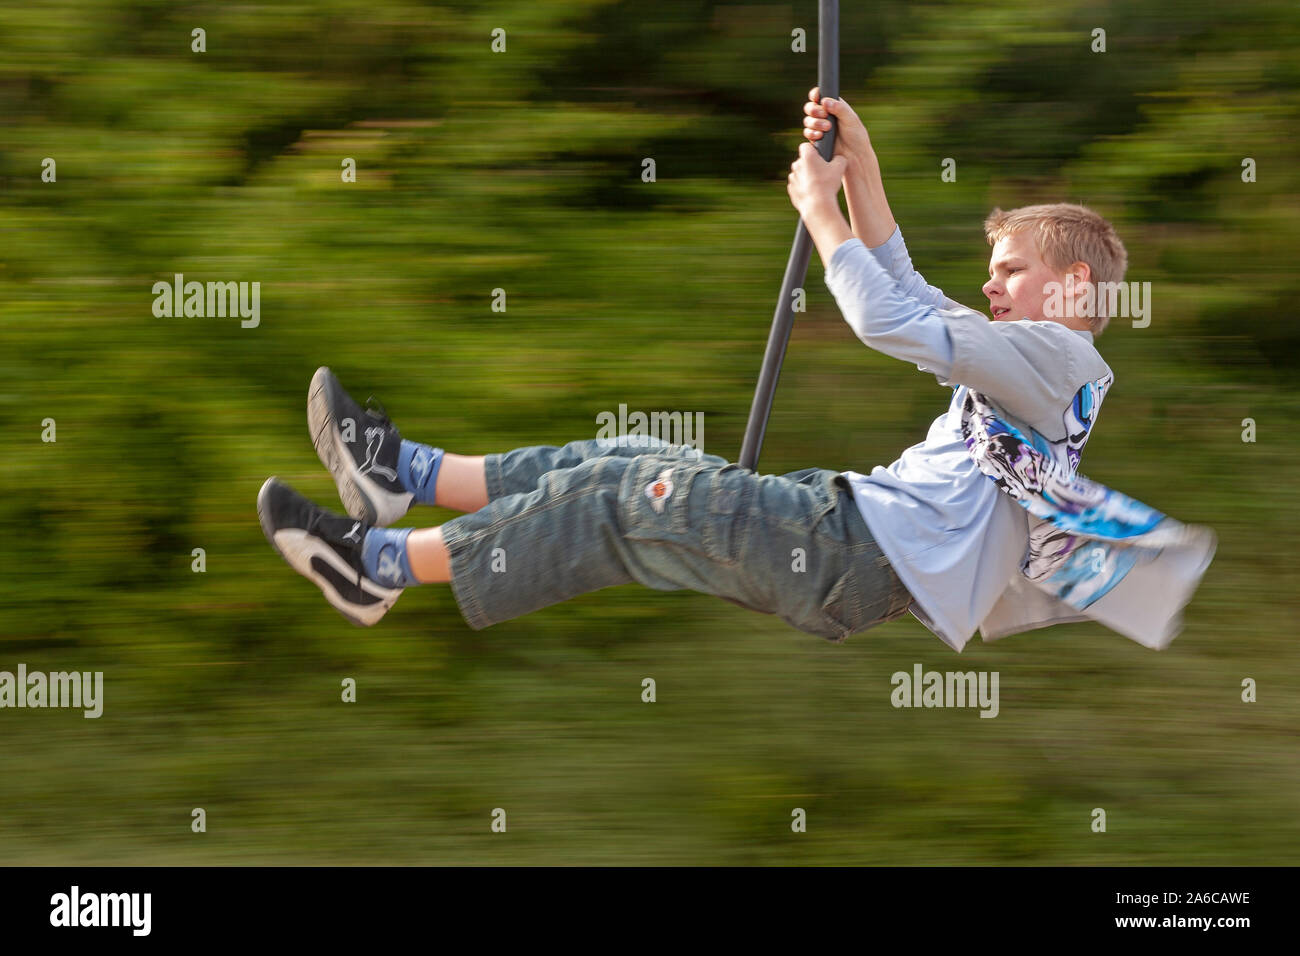 A teenage boy is riding on an aerial runway. Stock Photo